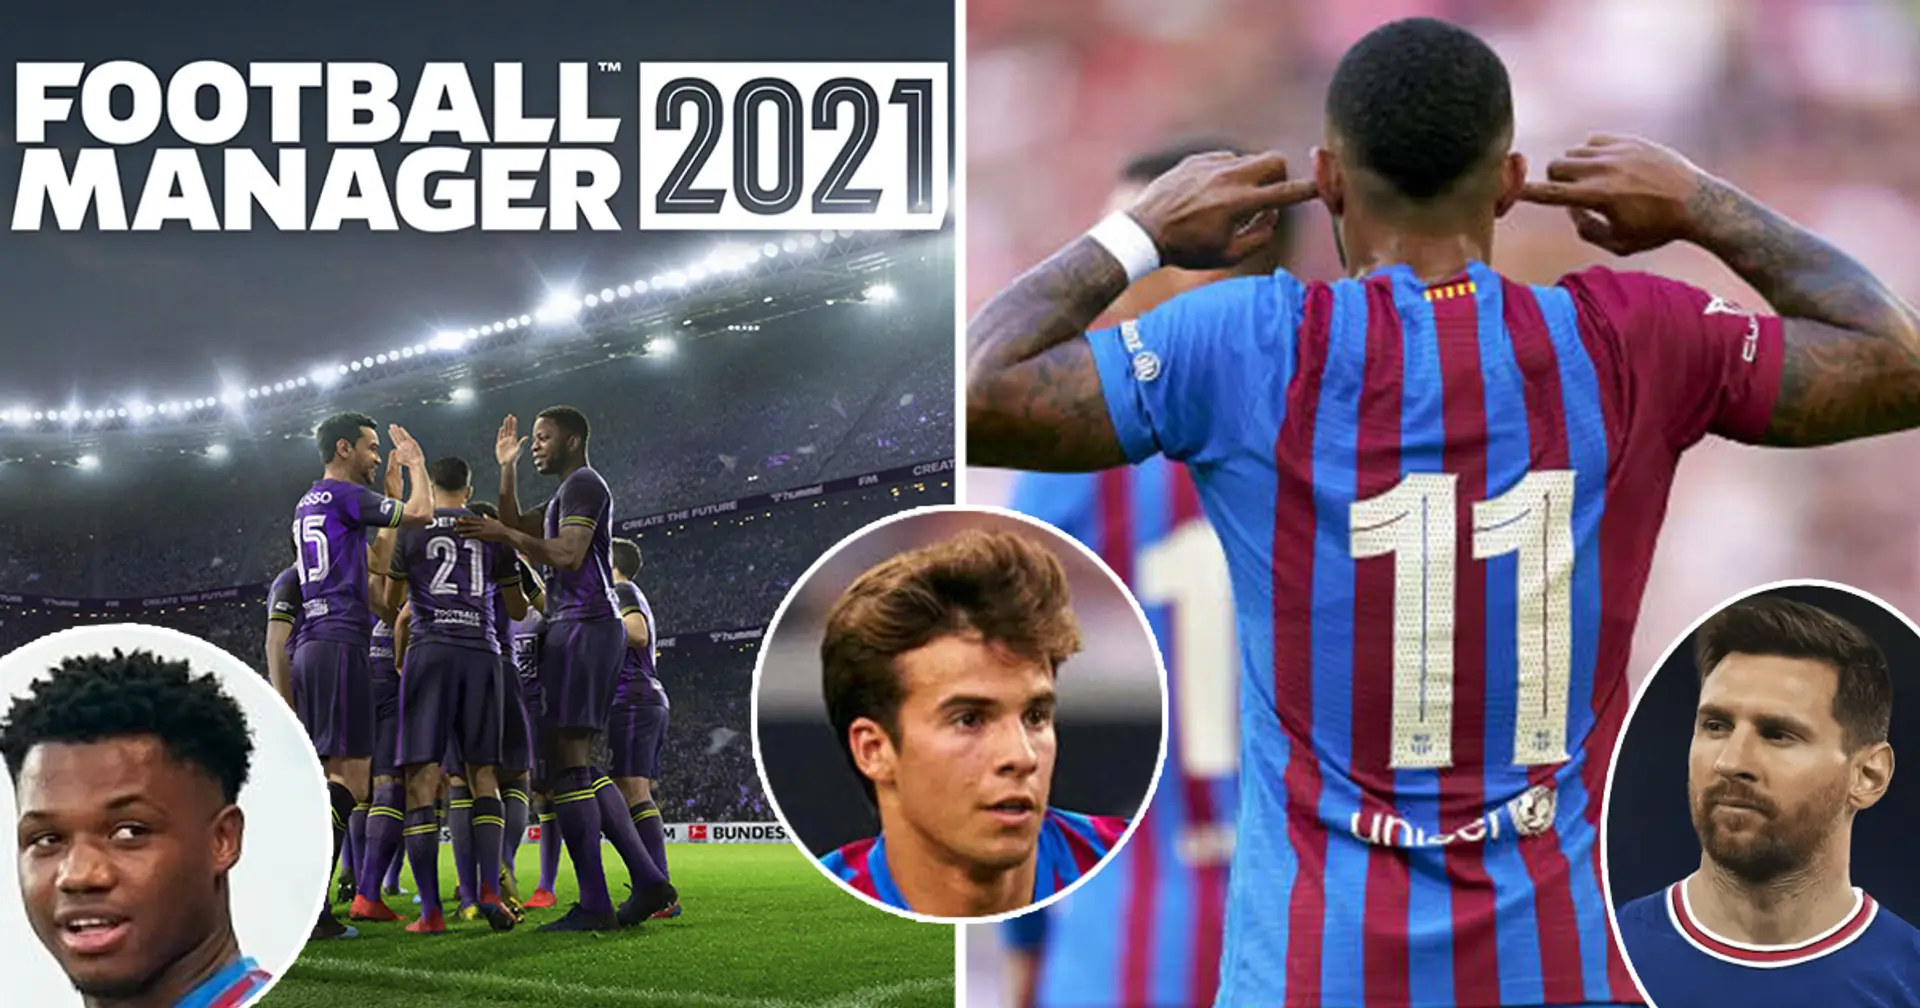 🔮 Trophyless Barca? How many goals will Messi score at PSG? Football Manager 2021 experiment